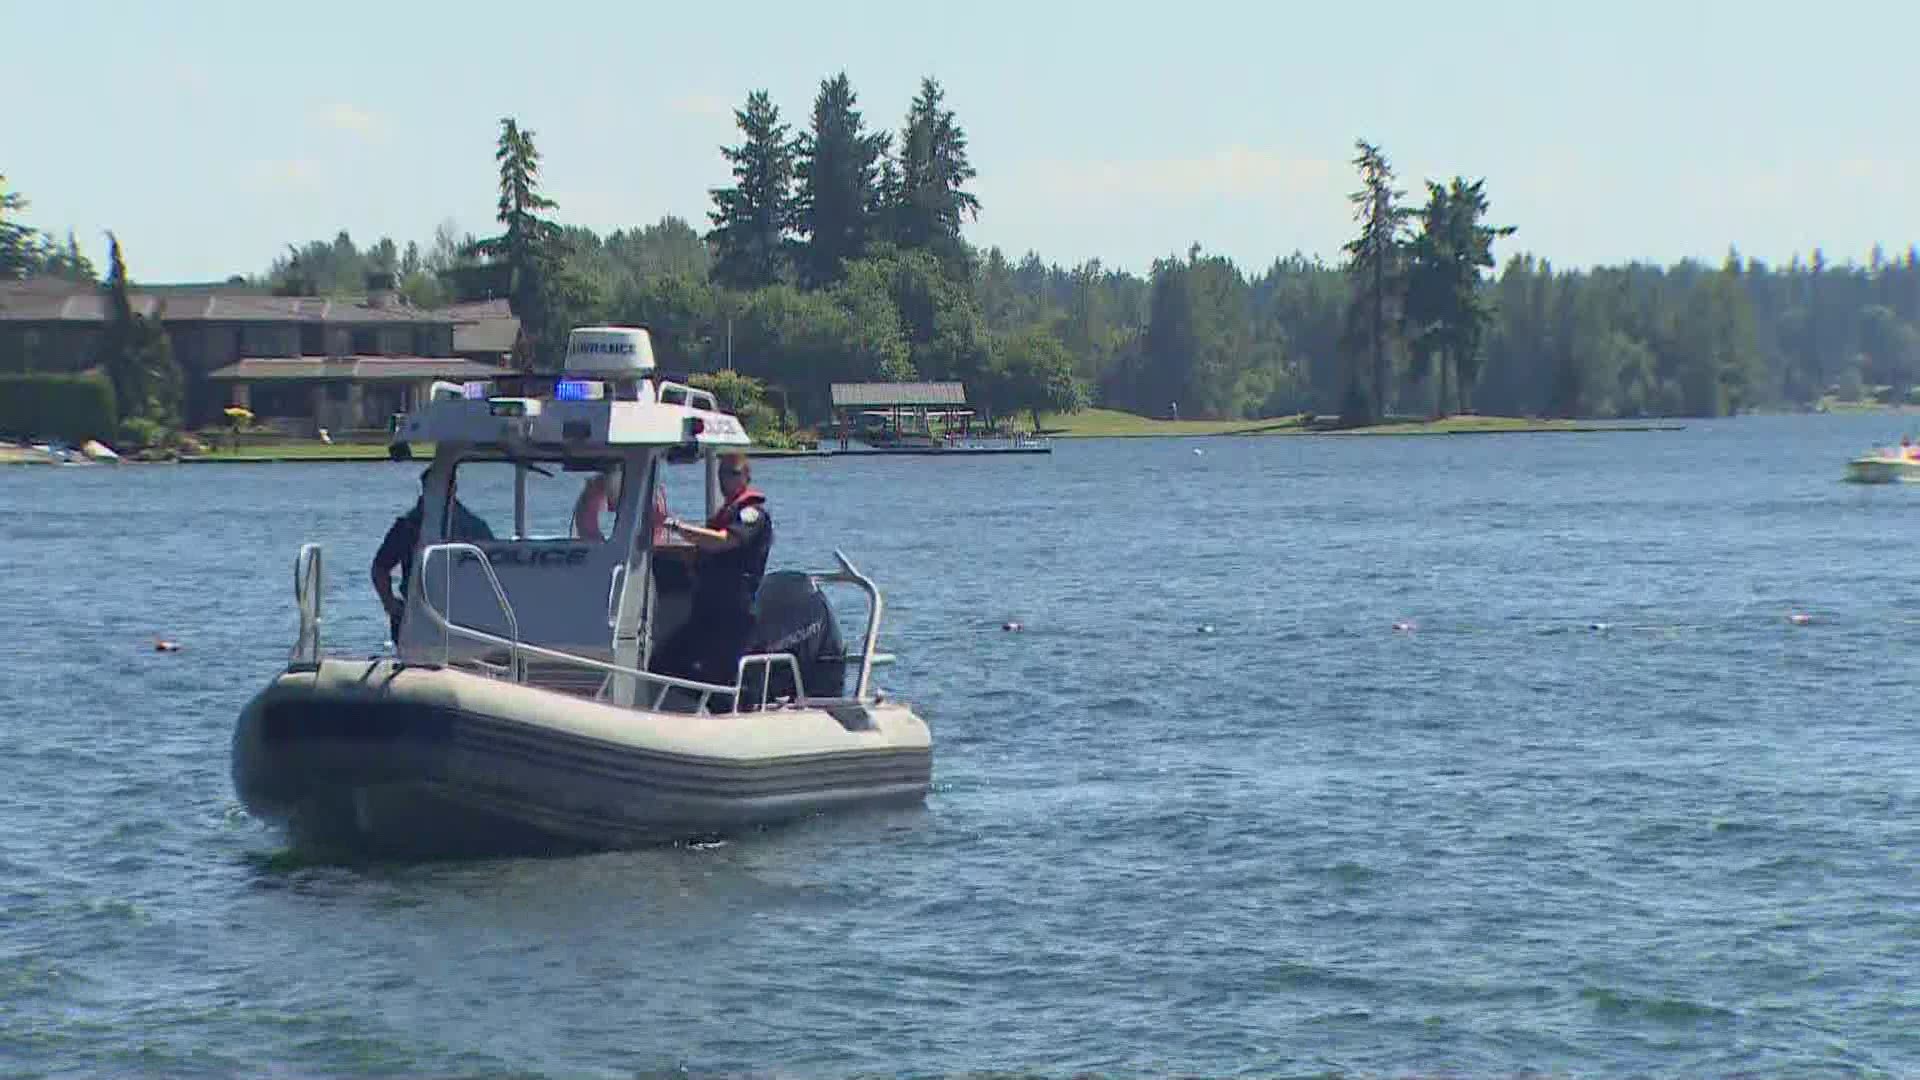 Two men in their 20s died while out on the water Friday in separate incidents in King and Pierce Counties.